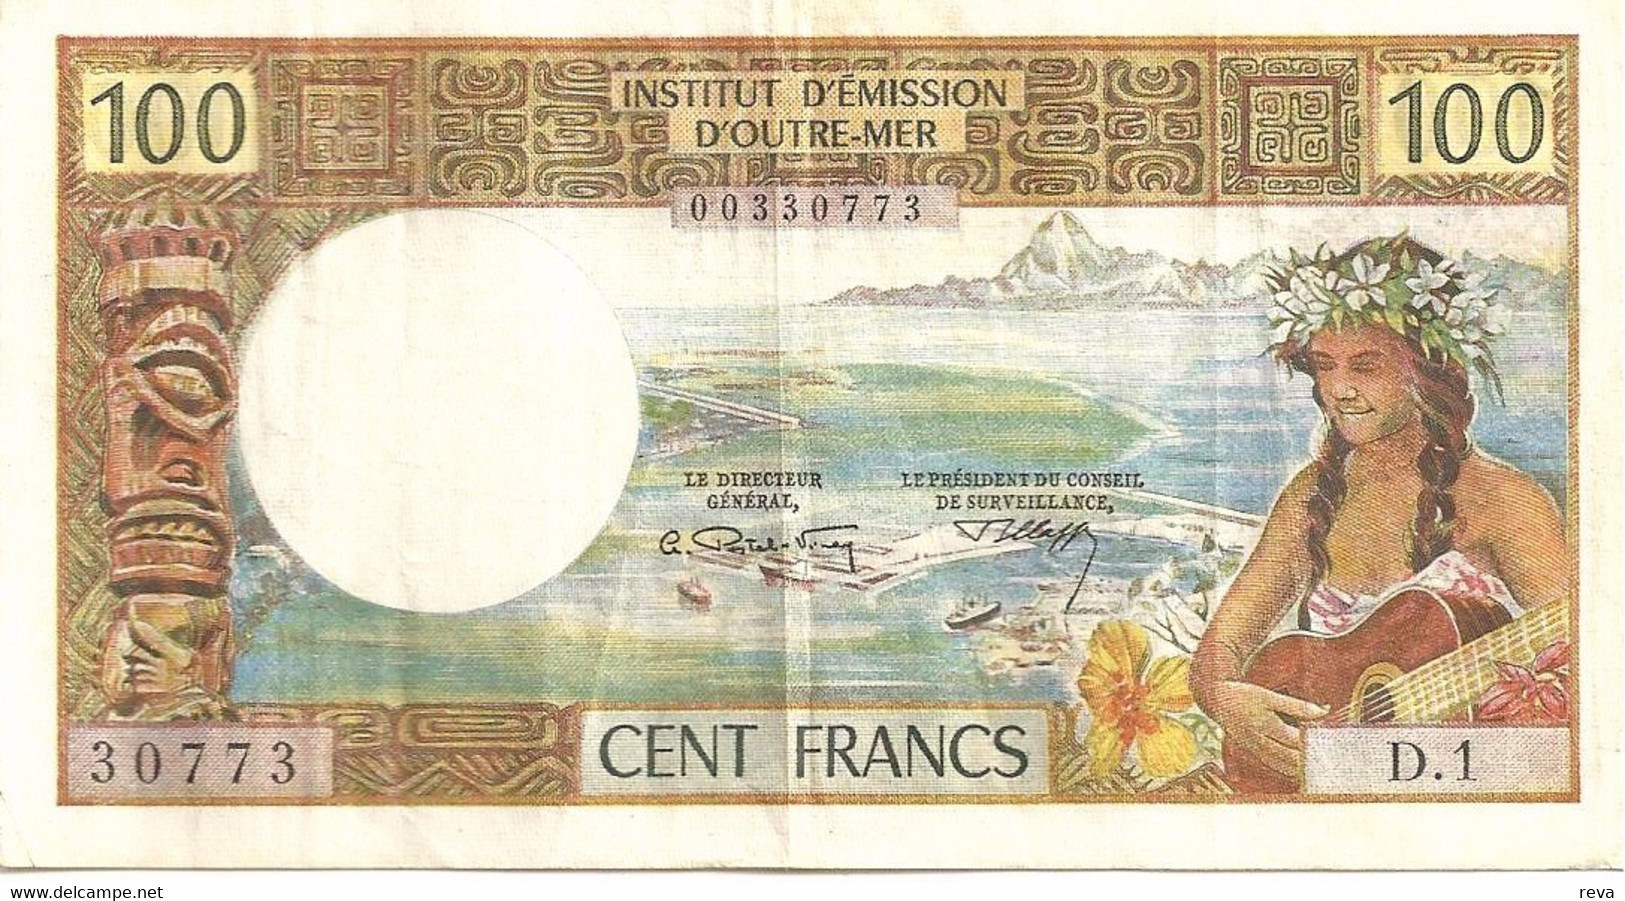 FRENCH POLYNESIA 100 FRANCS BROWN WOMAN FRONT WOMAN HEAD BACK NOT DATED(1971) P24b SIG VARIETY F READ DESCRIPTION!! - Papeete (Polinesia Francese 1914-1985)